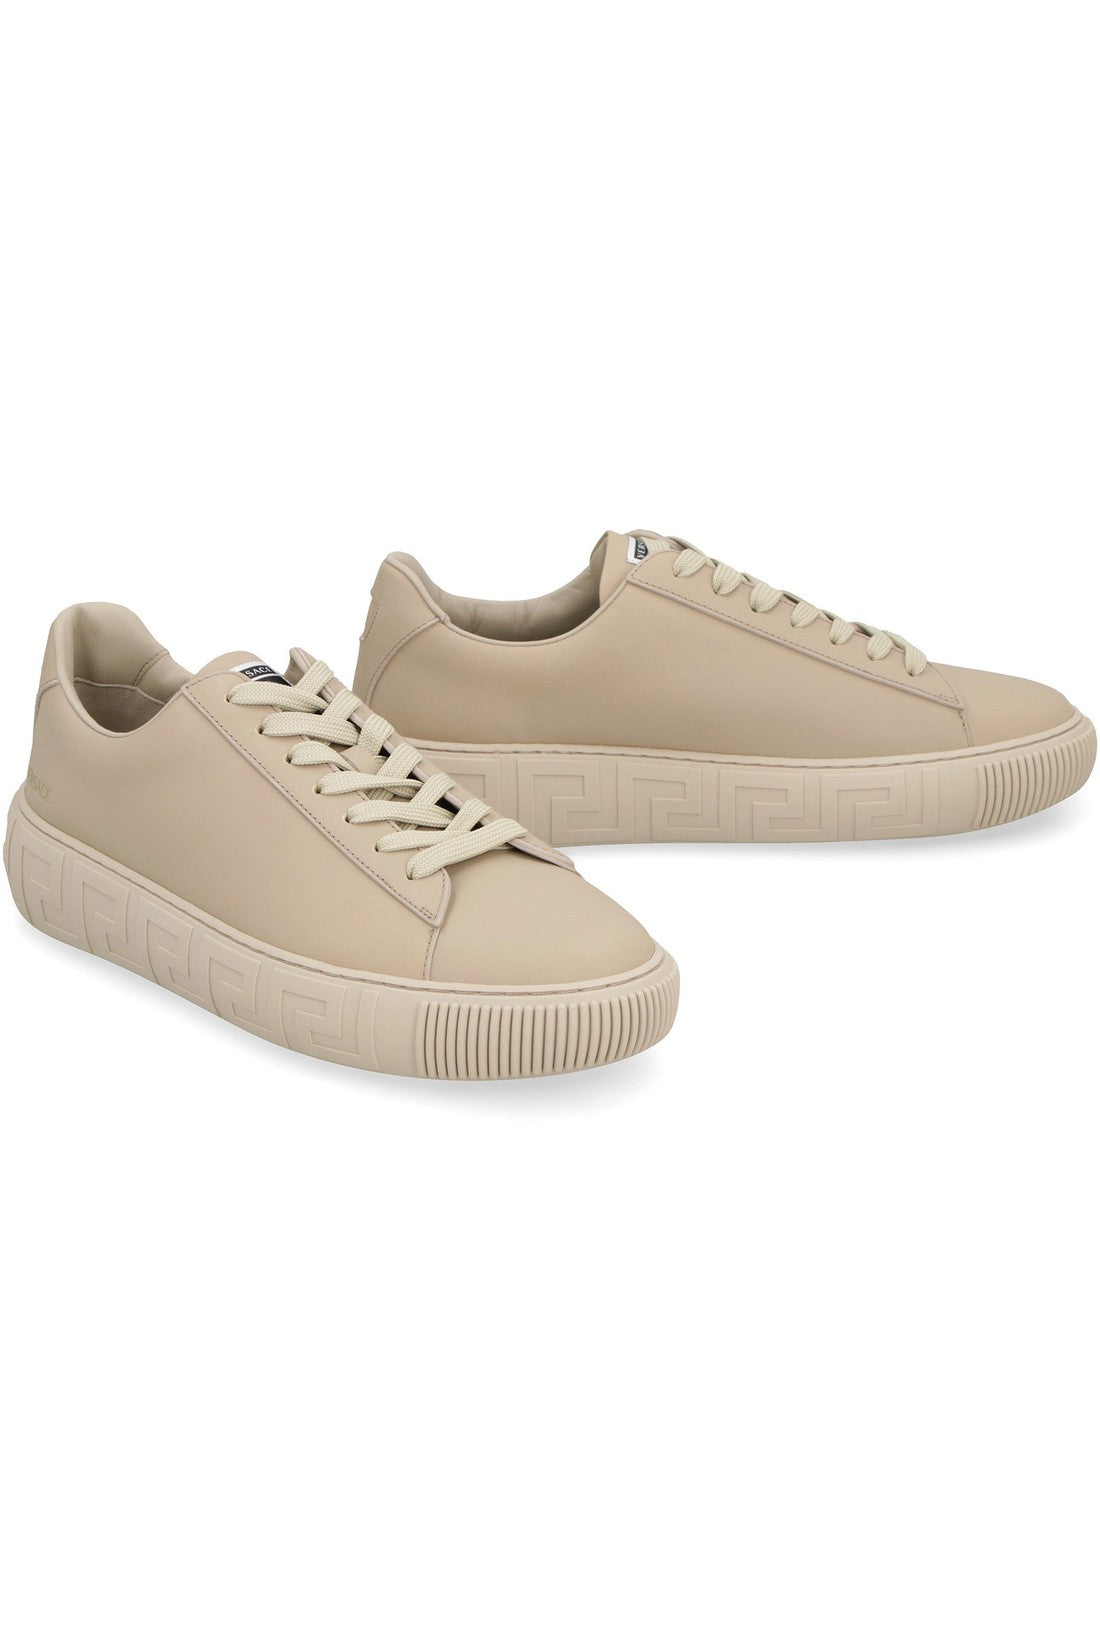 Versace-OUTLET-SALE-Greca leather sneakers-ARCHIVIST